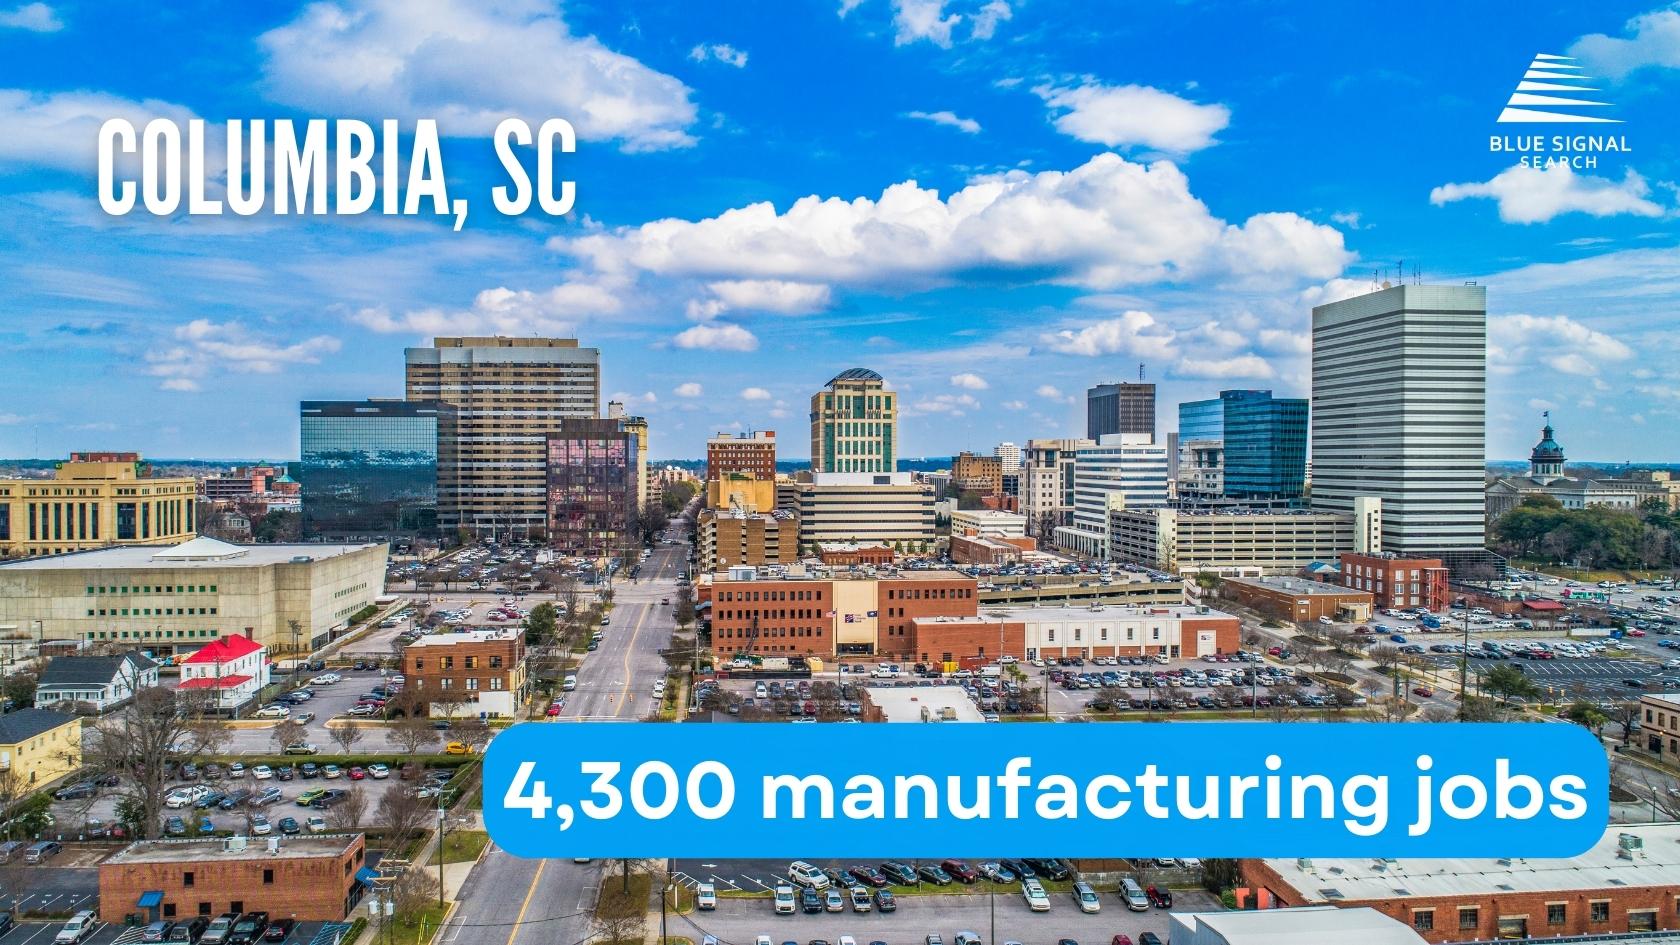 Skyline of Columbia, SC with key manufacturing statistics highlighted.